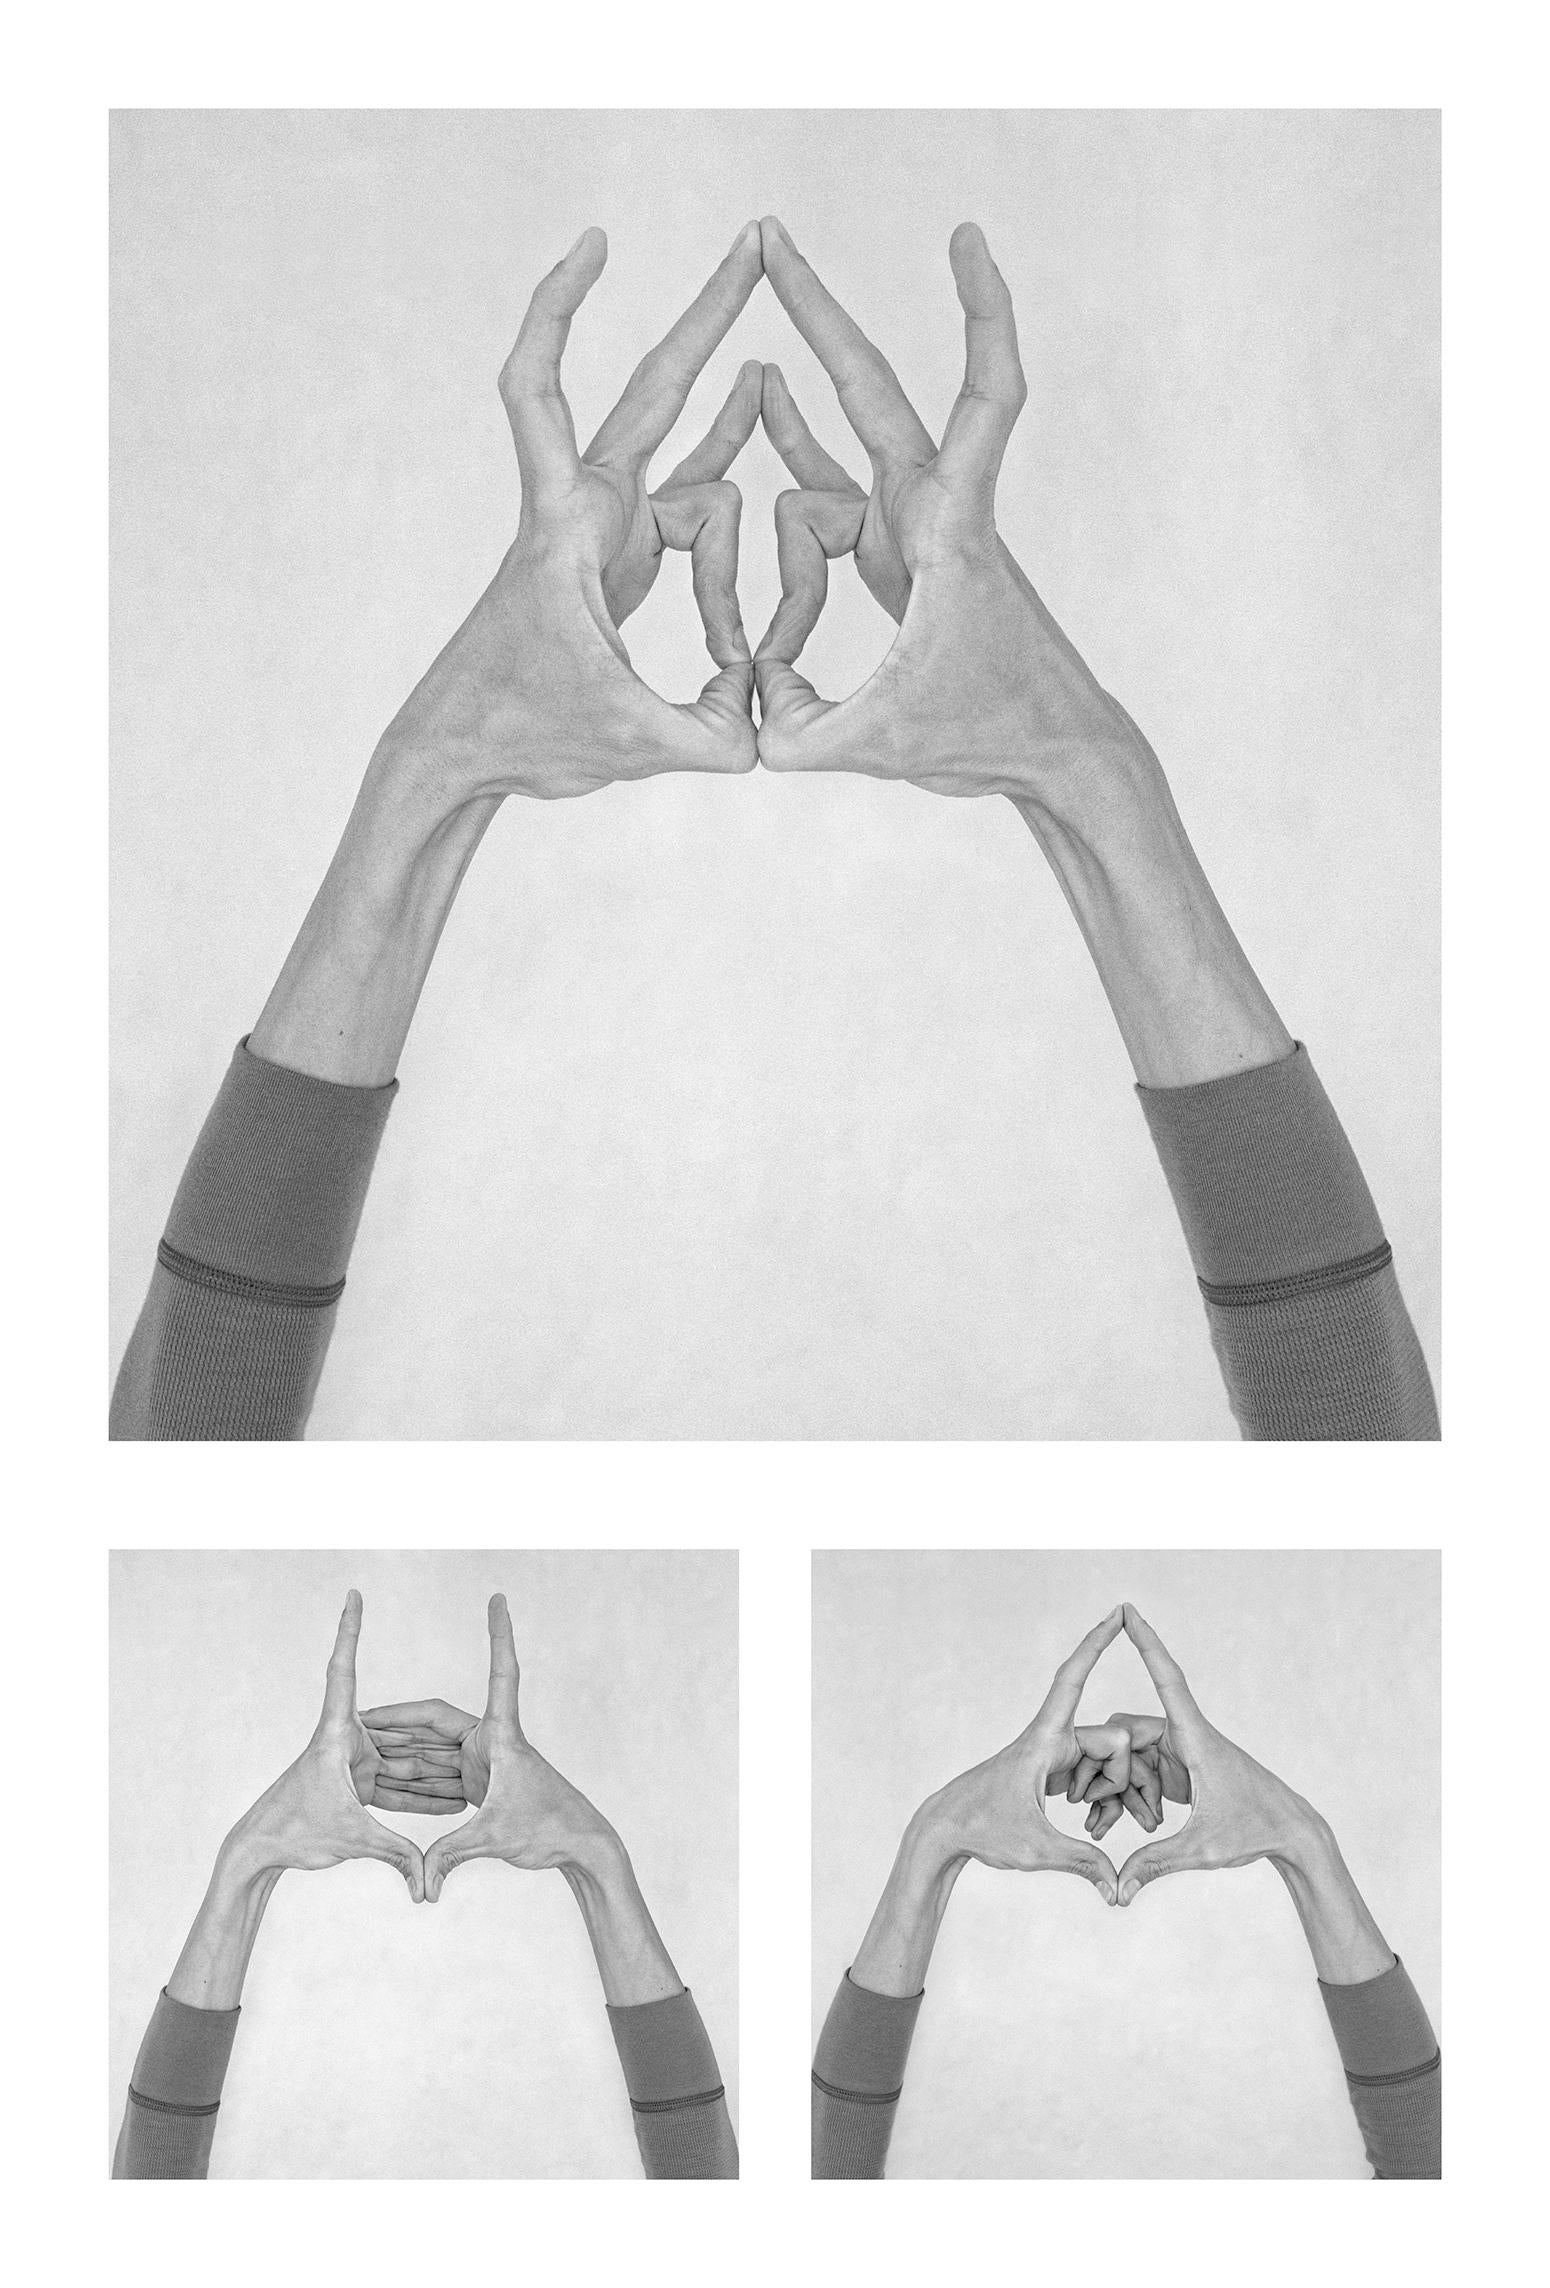 Nico Baixas / Gos-com-fuig Black and White Photograph - Untitled XIII, XIV, and XV From the Series Chiromorphose. Hands